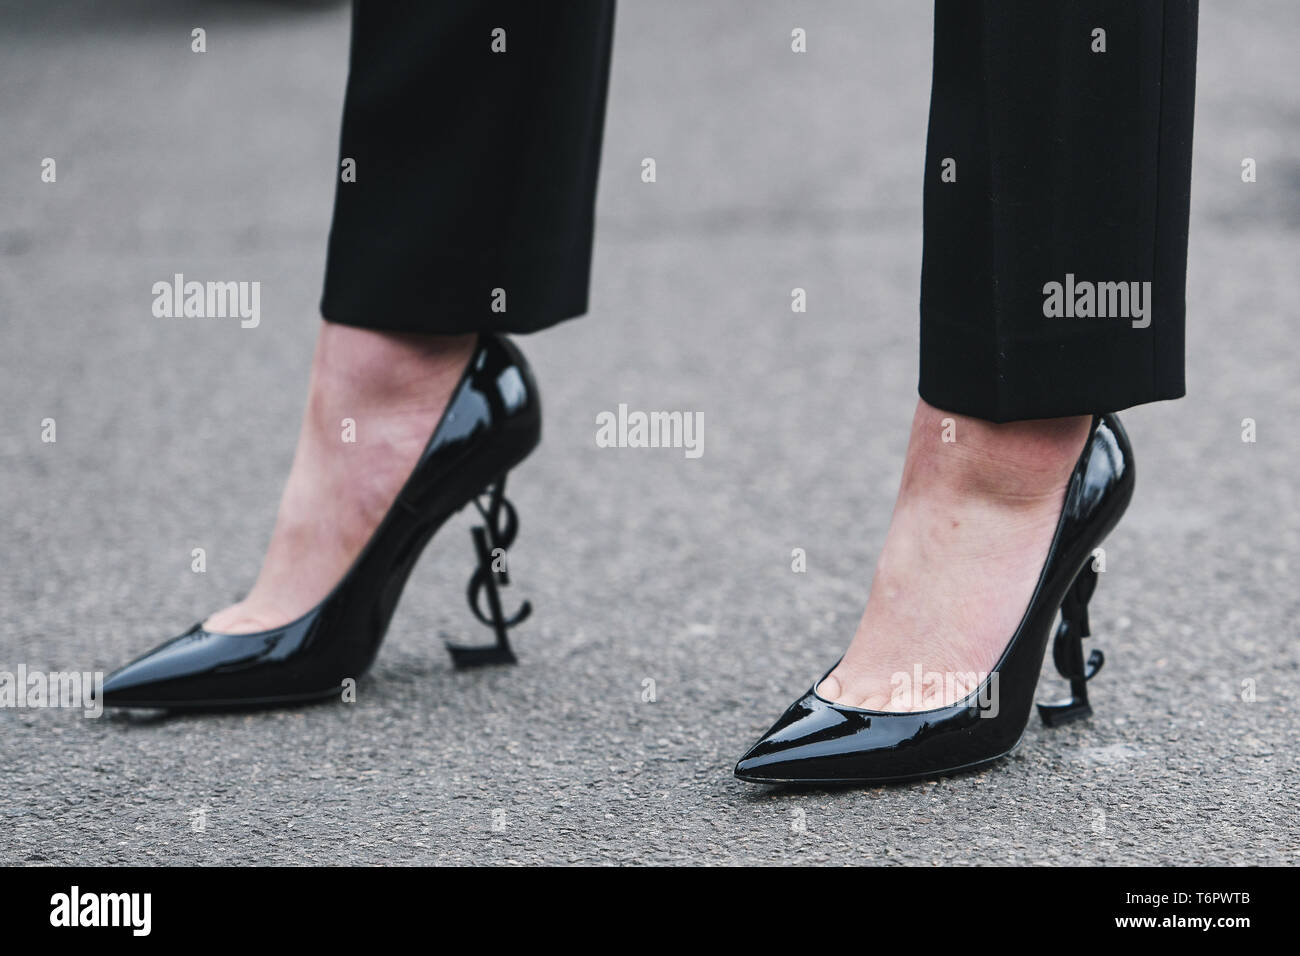 Milan, Italy - February 23, 2019: Street style – Shoes detail after a fashion show during Milan Fashion Week - MFWFW19 Stock Photo